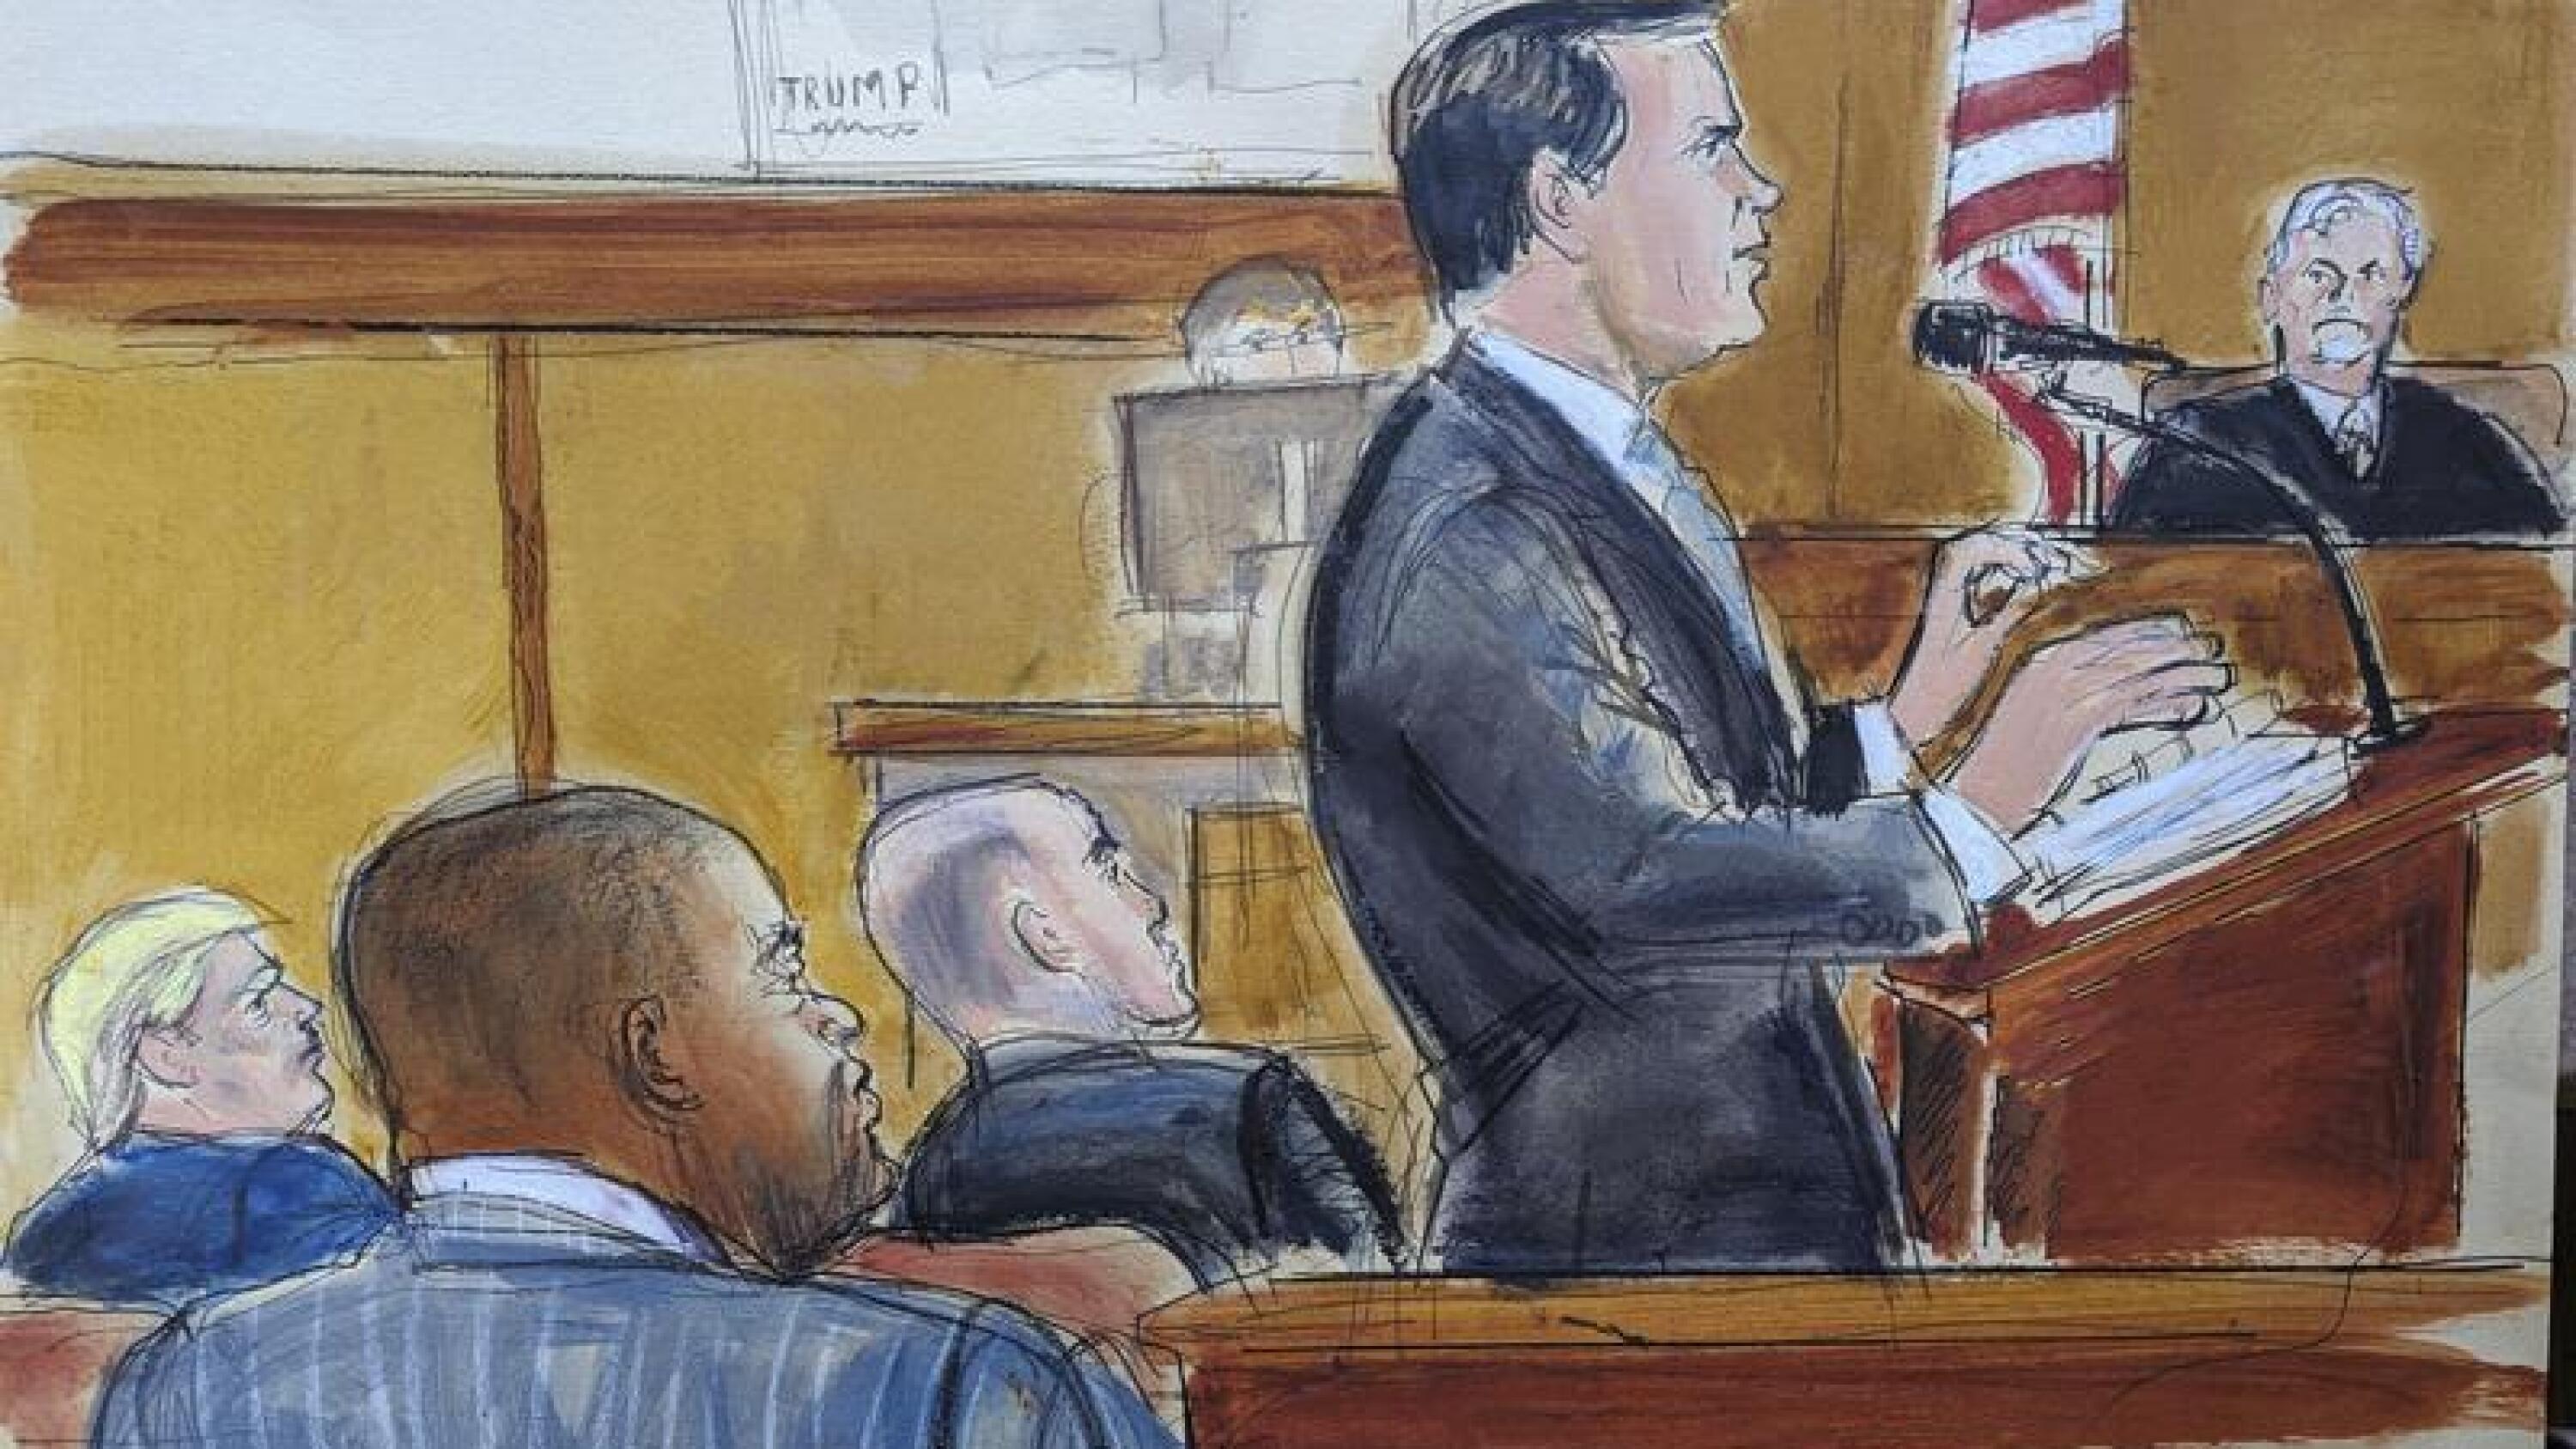 Updated: Prosecutor says Trump tried 'to hoodwink voters' while defense attacks key witness in last arguments